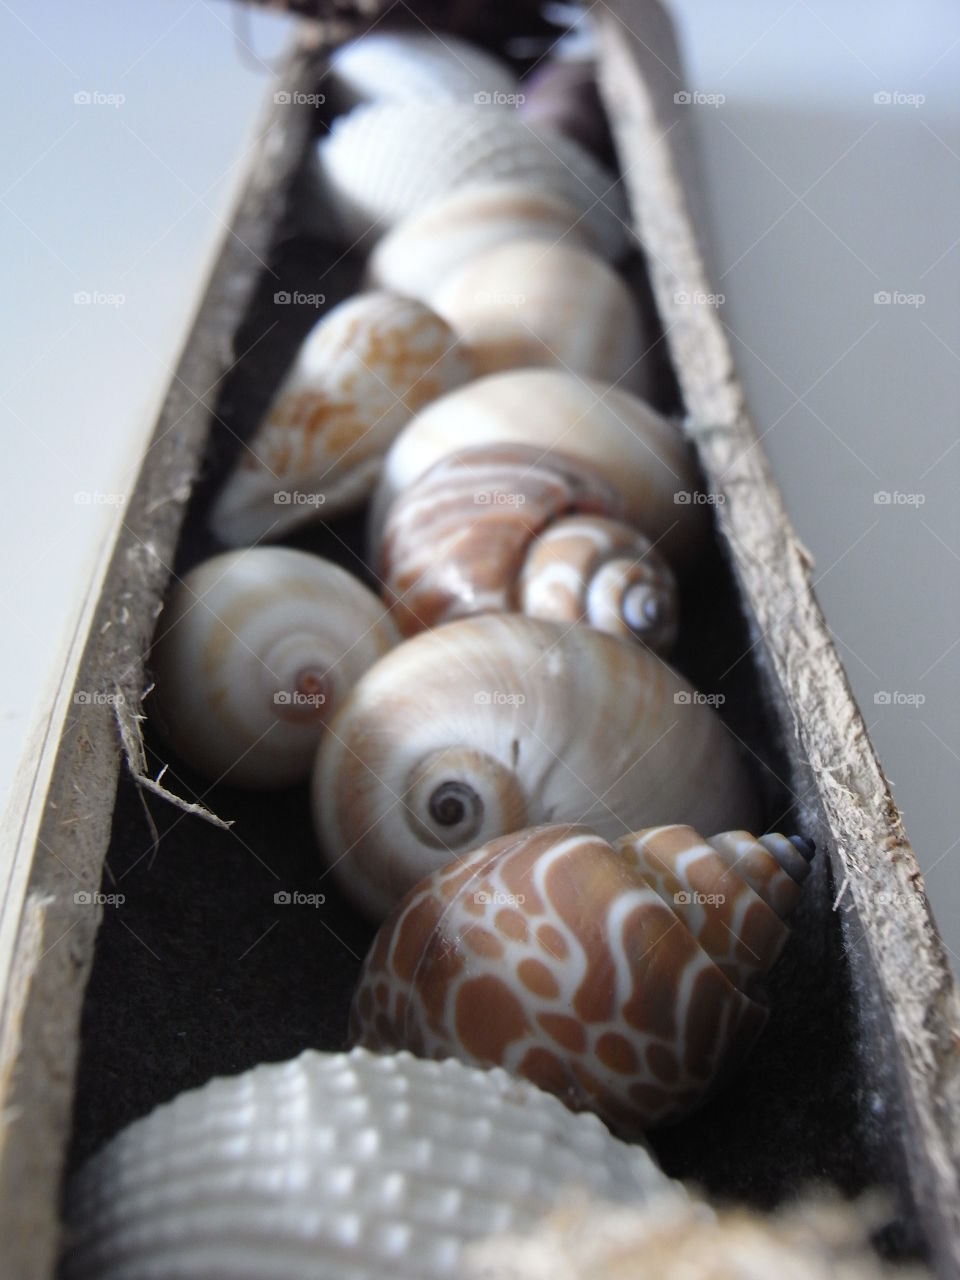 Sea shells in a wooden dish